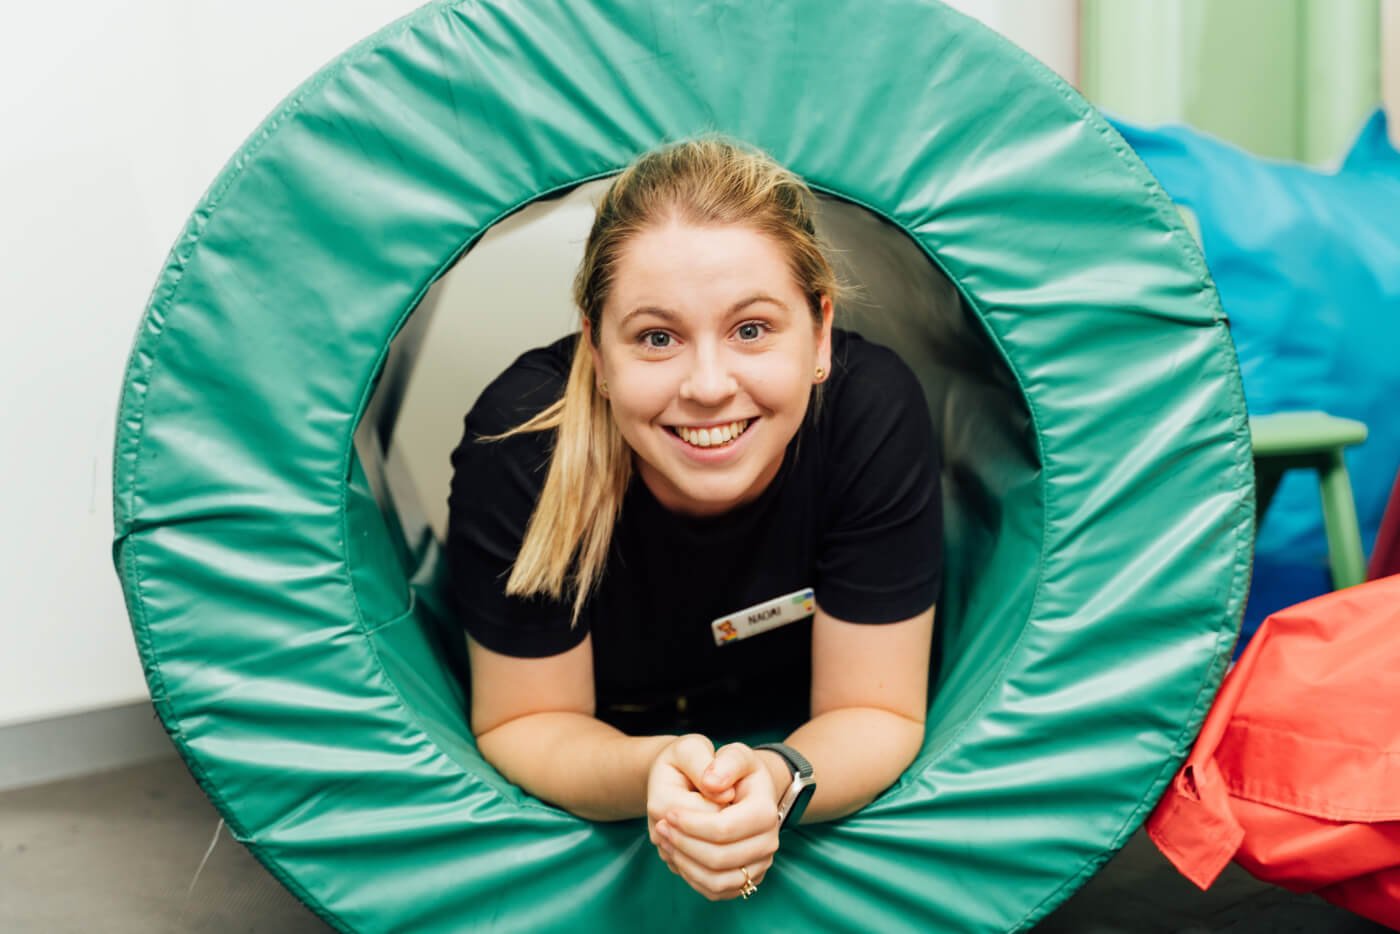 A woman with blonde hair smiles while lying inside a green padded play tunnel.